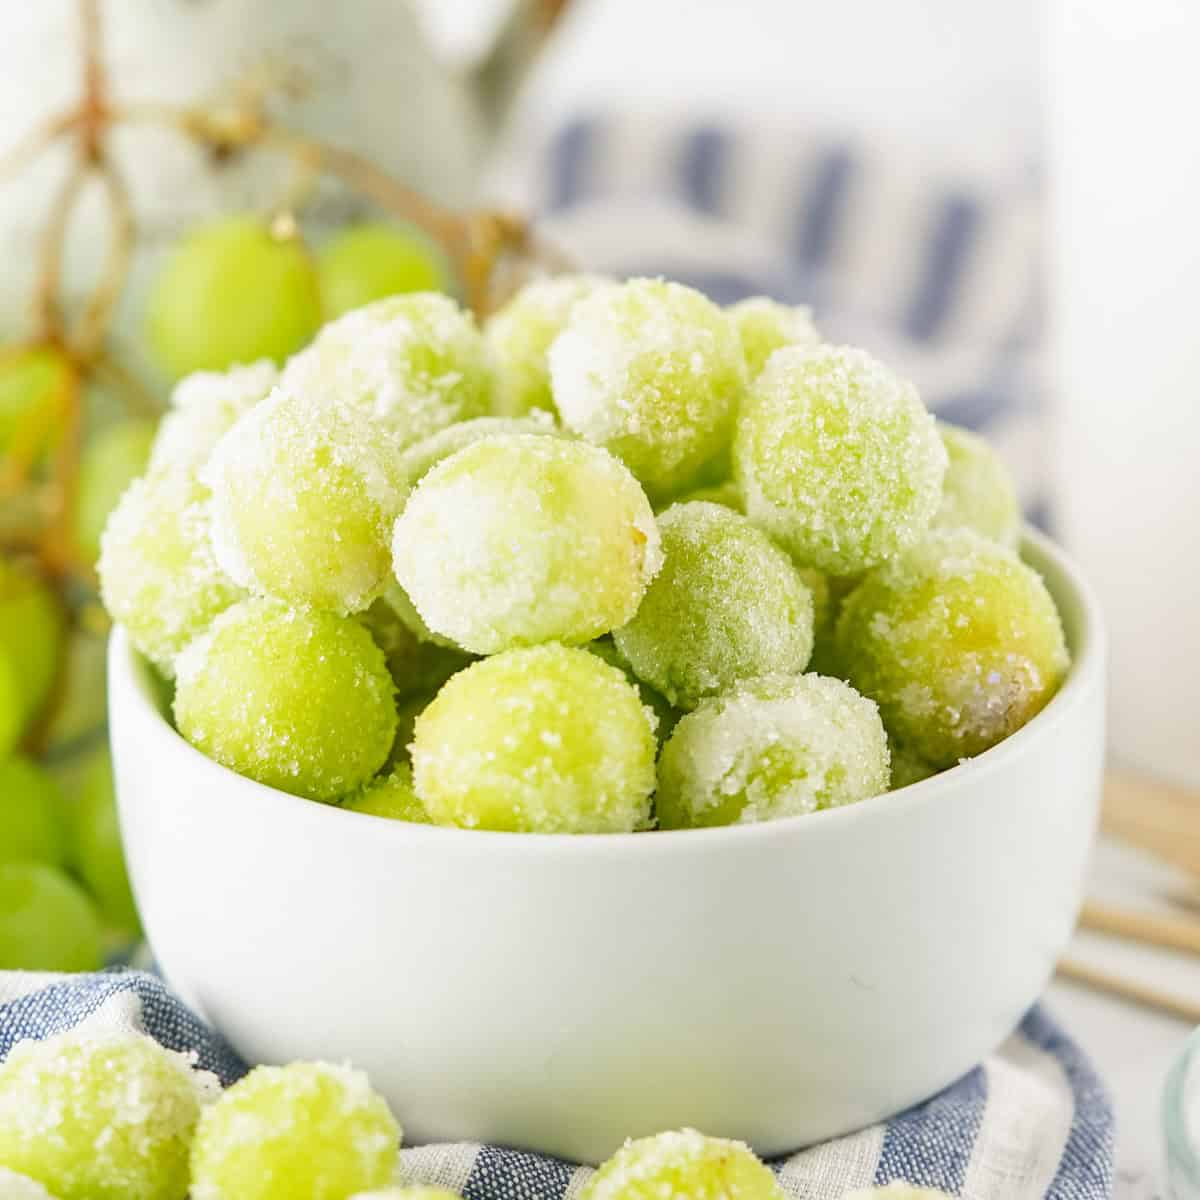 Green sugar coated grapes in white bowl.